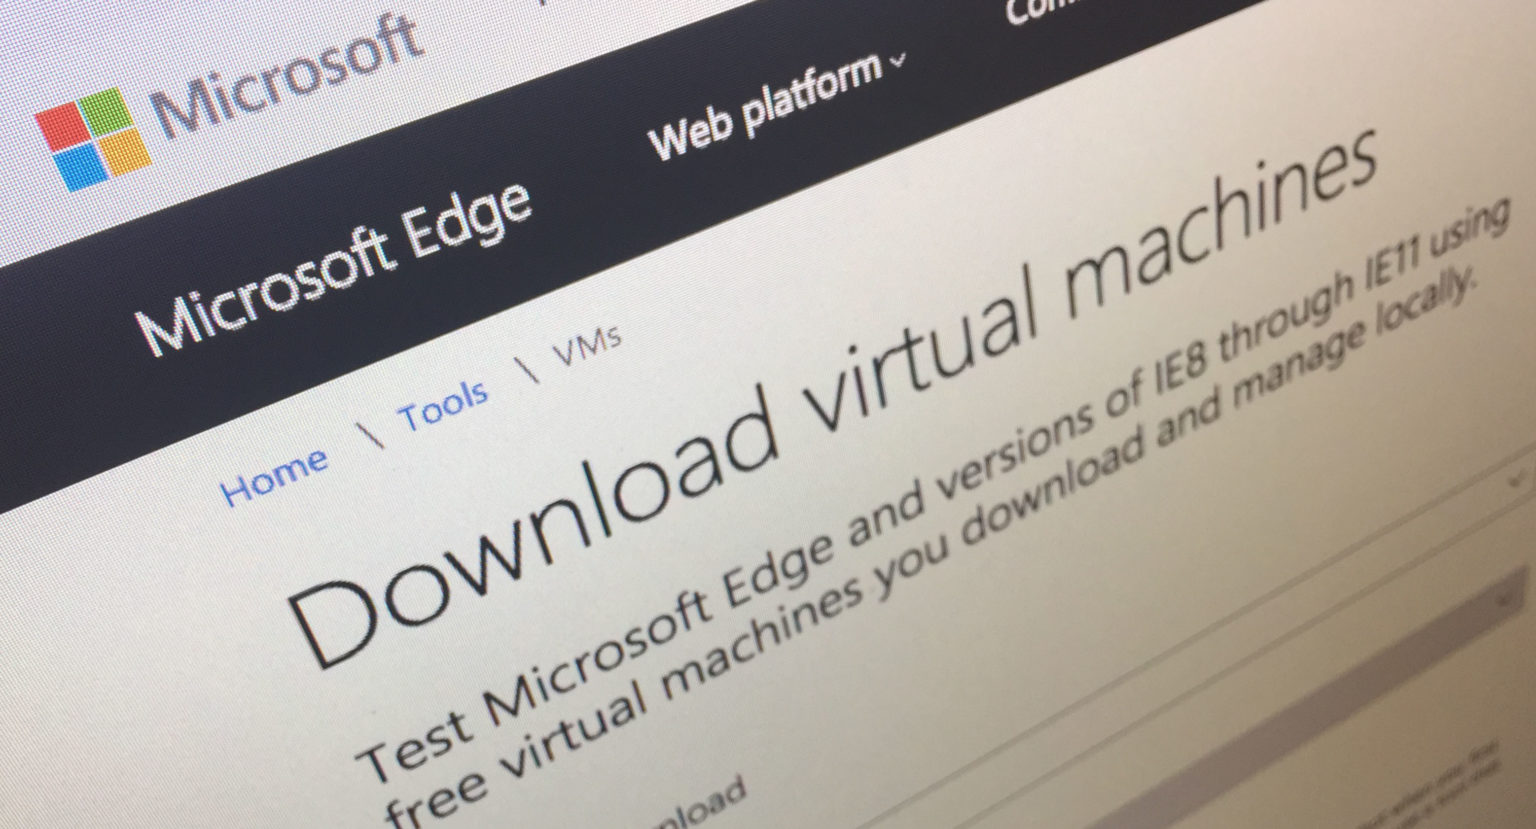 test microsoft edge and versions of ie 6 through ie11 free download